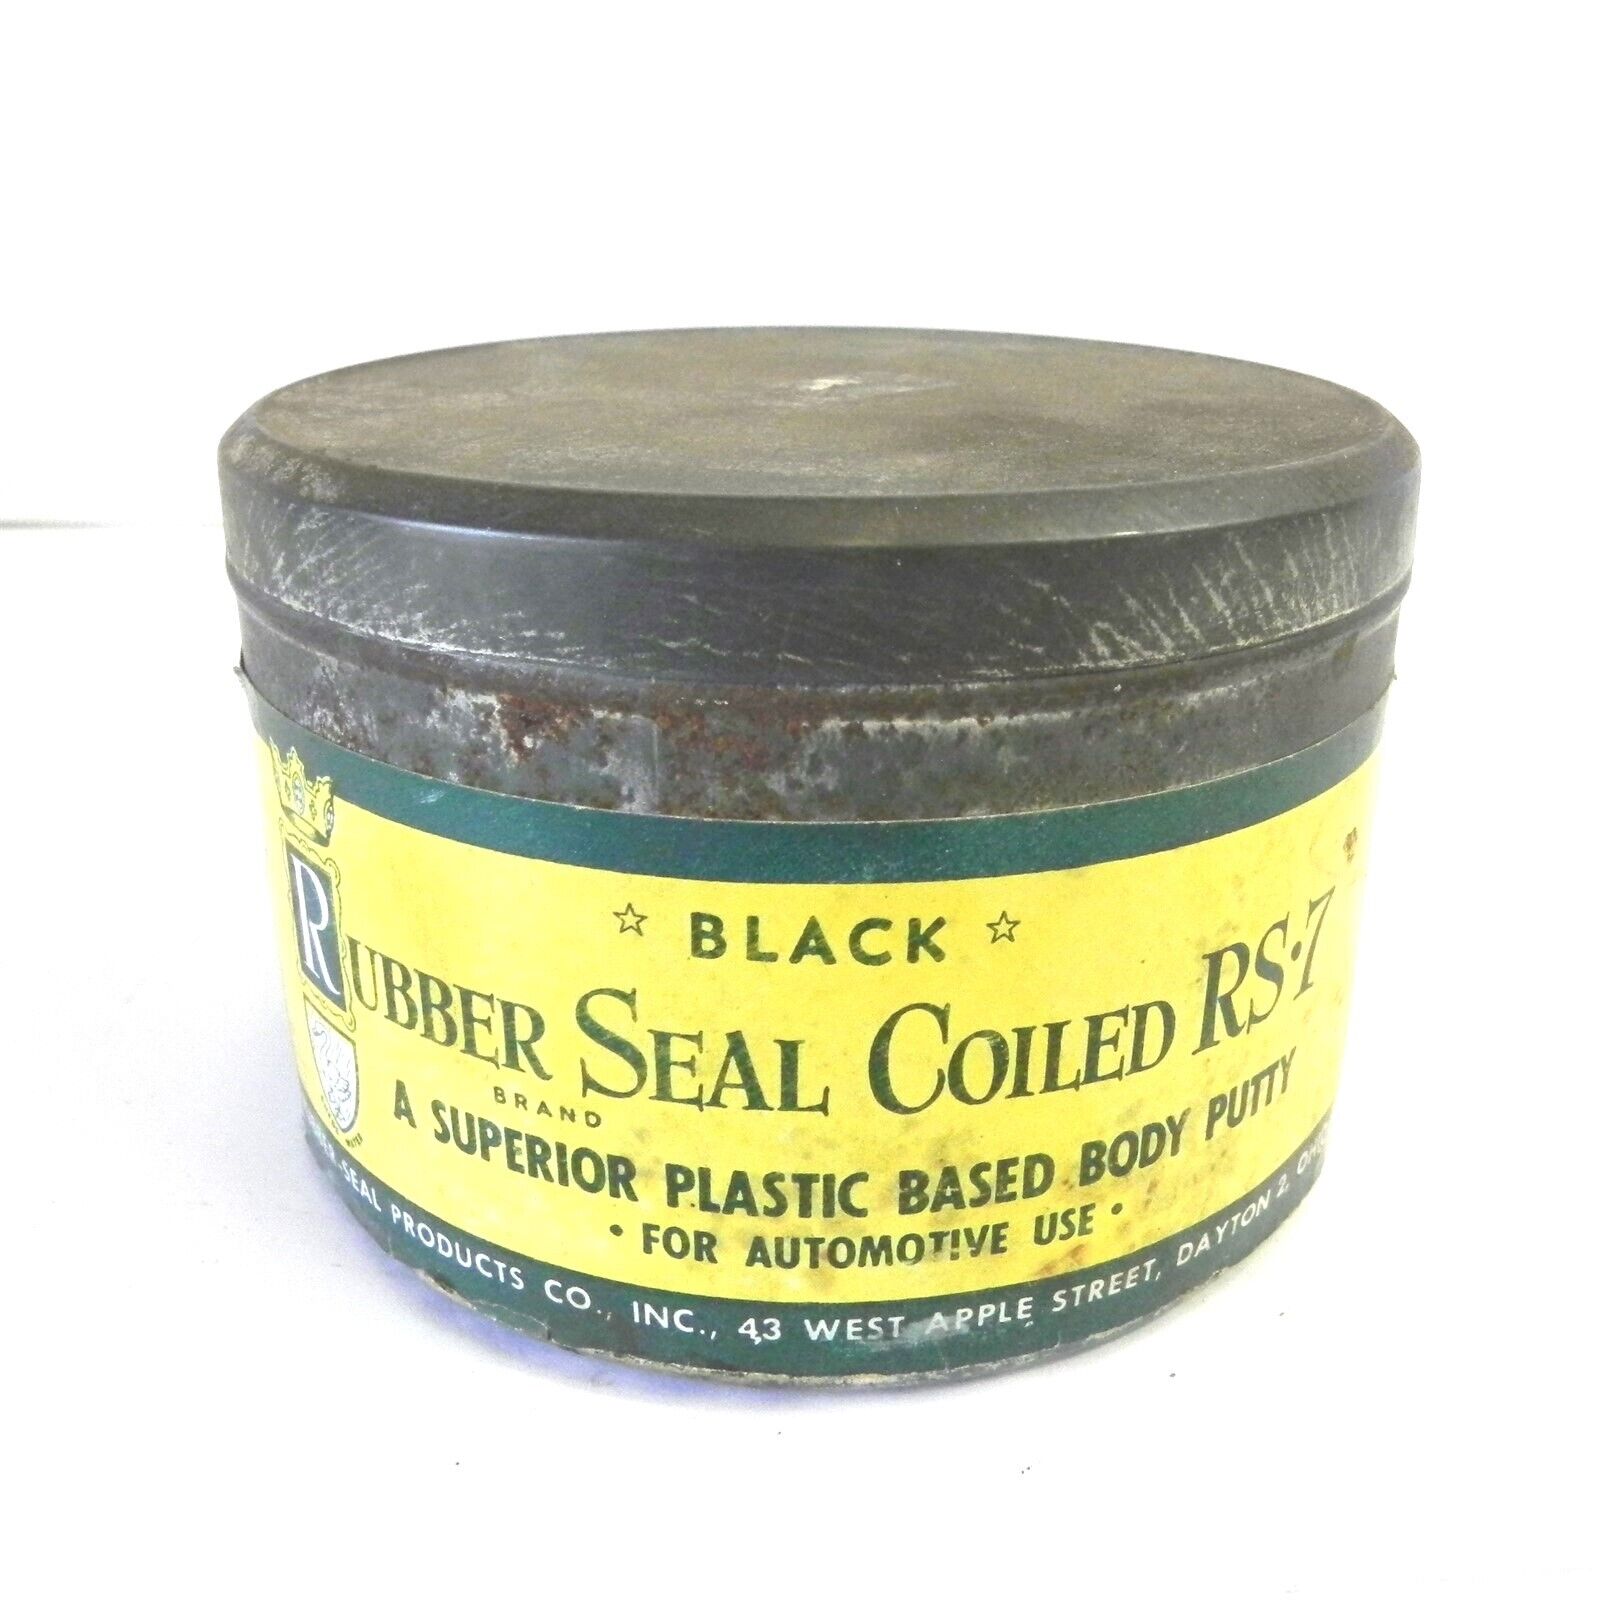 VINTAGE RUBBER SEAL COILED RS-7 BODY PUTTY EMPTY CAN RARE USED COLLECTABLE USED